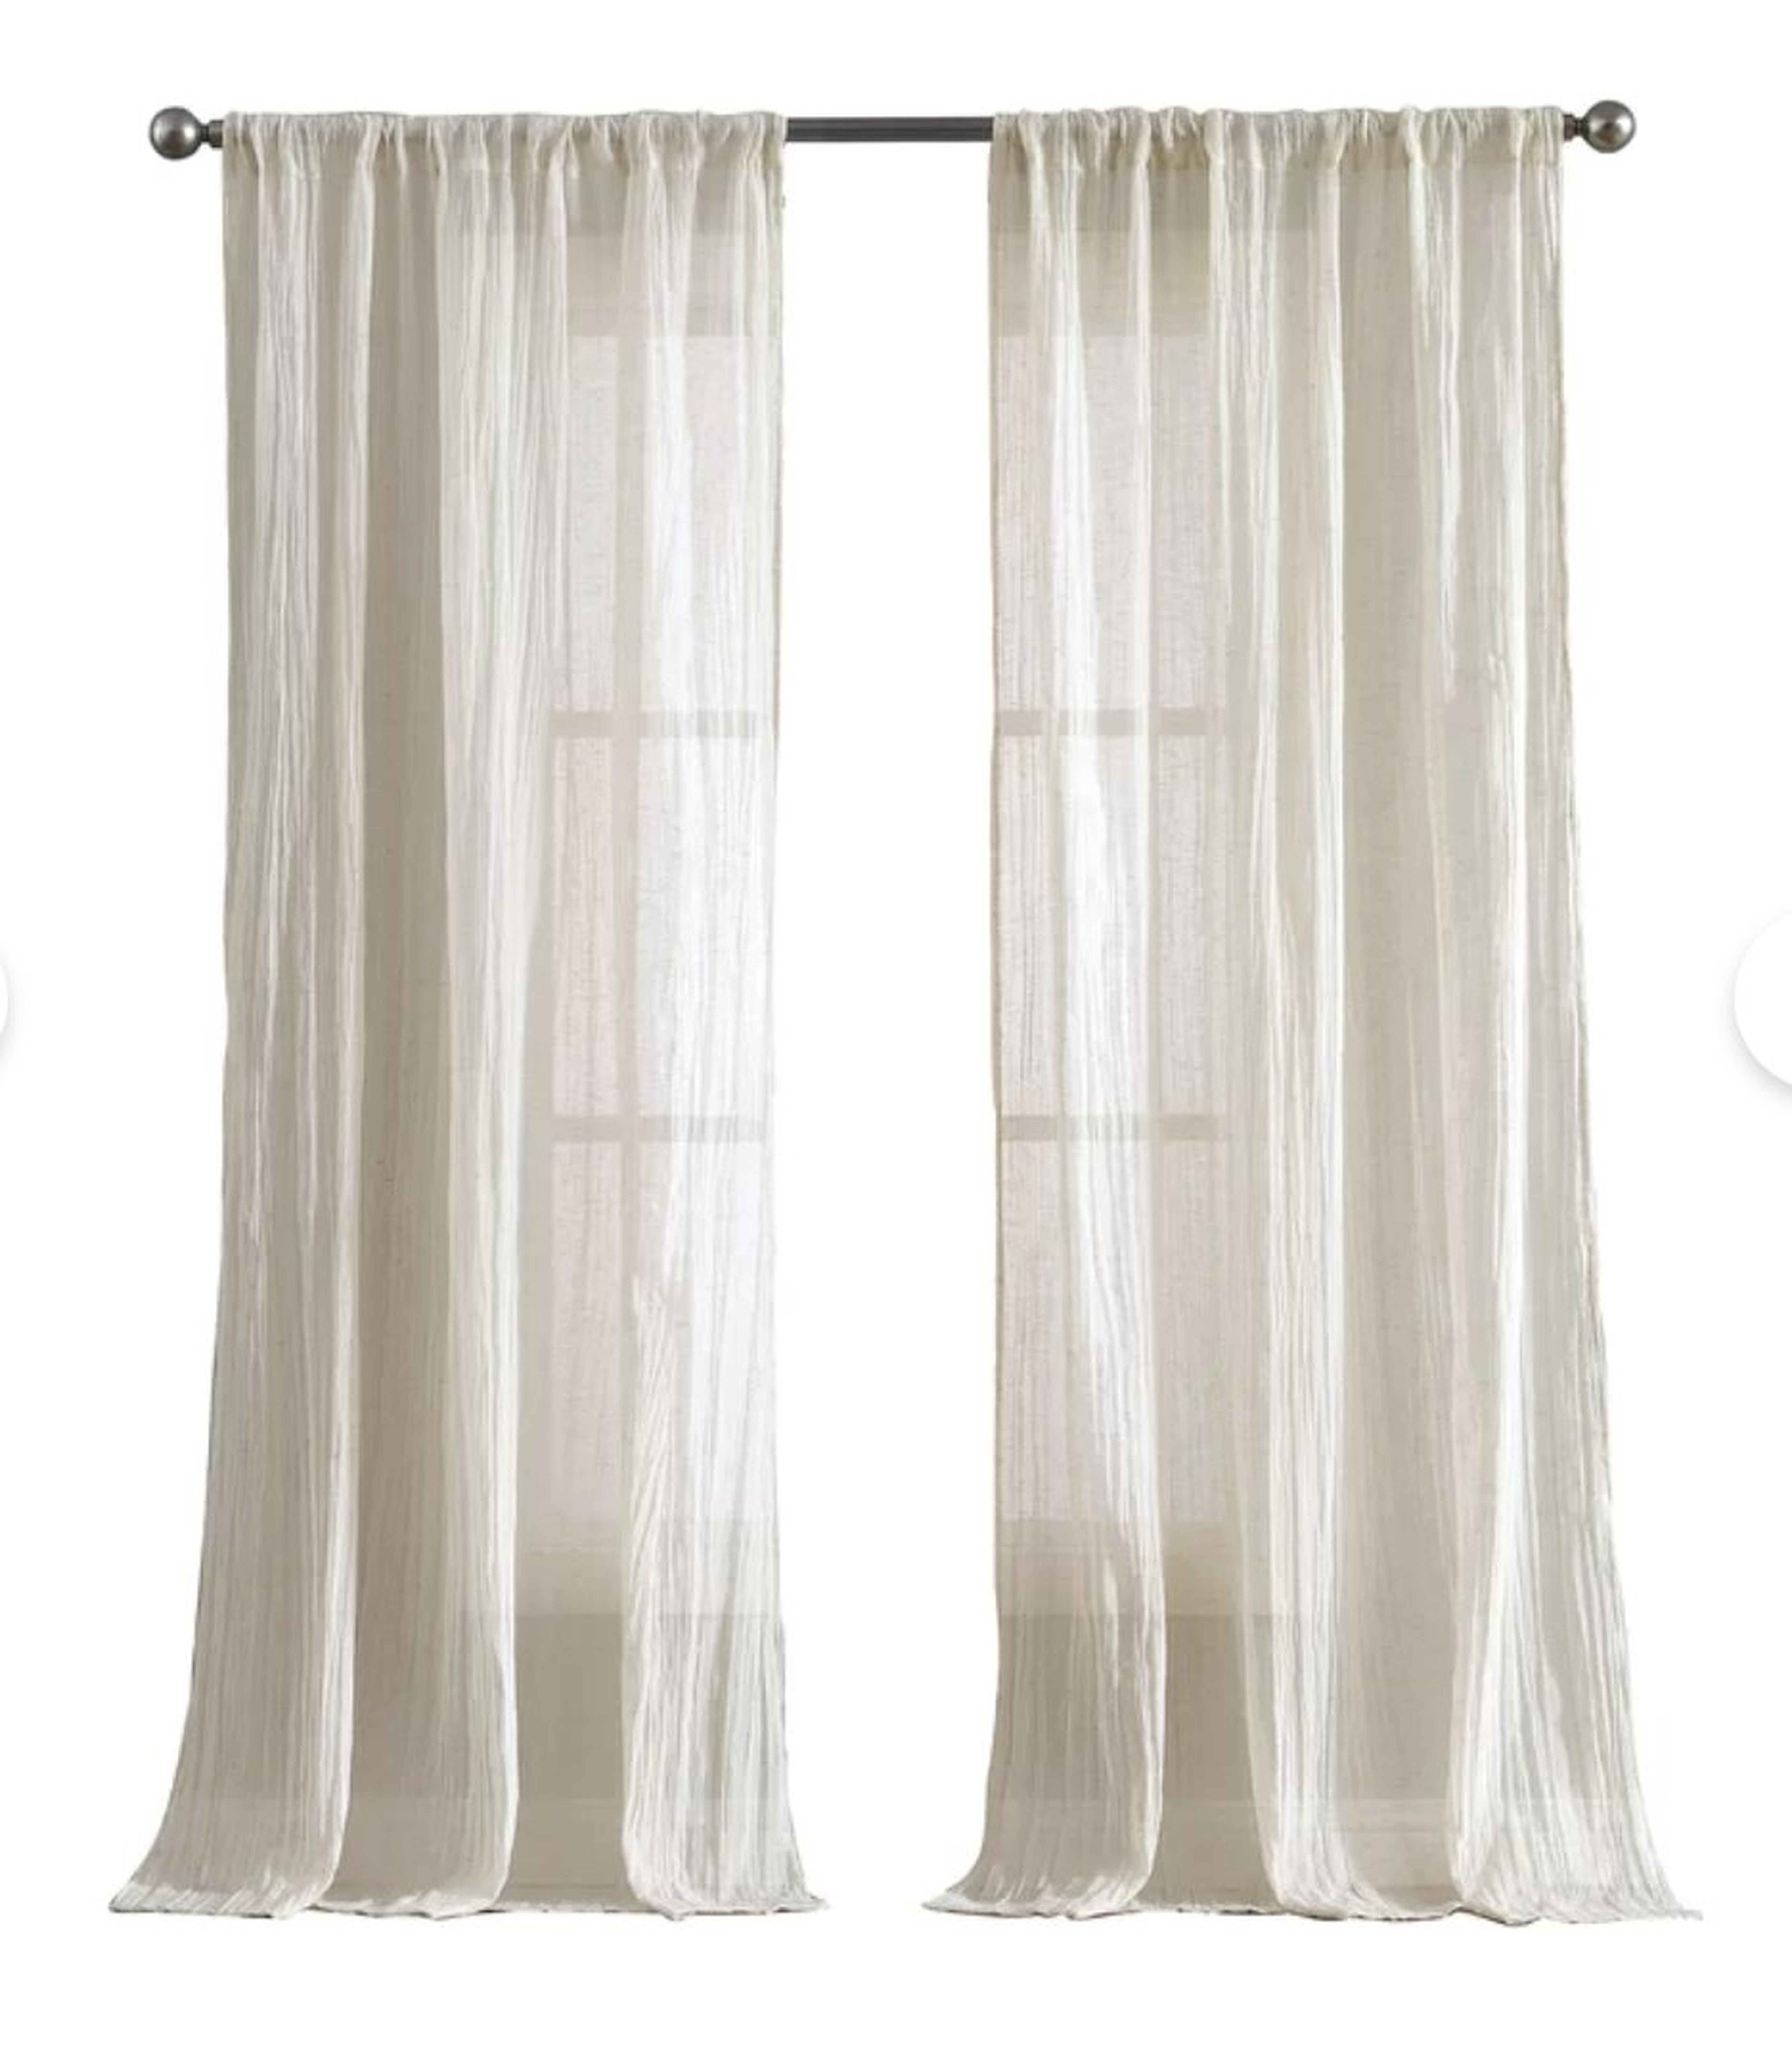 French Connection Charter Crushed Window Solid Semi-Sheer Curtain Panels (Set of 2) - Wayfair